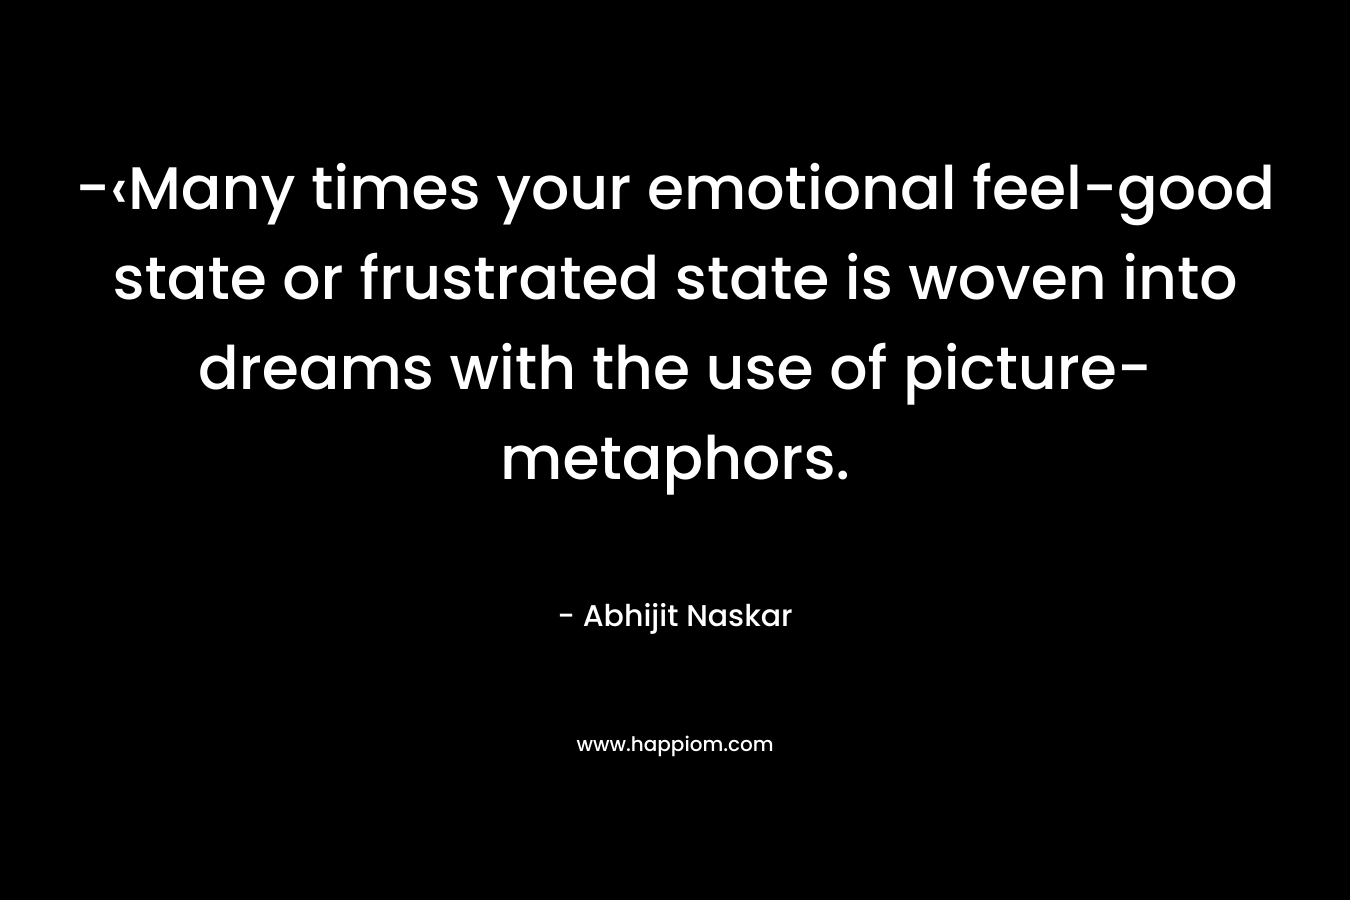 -‹Many times your emotional feel-good state or frustrated state is woven into dreams with the use of picture-metaphors.